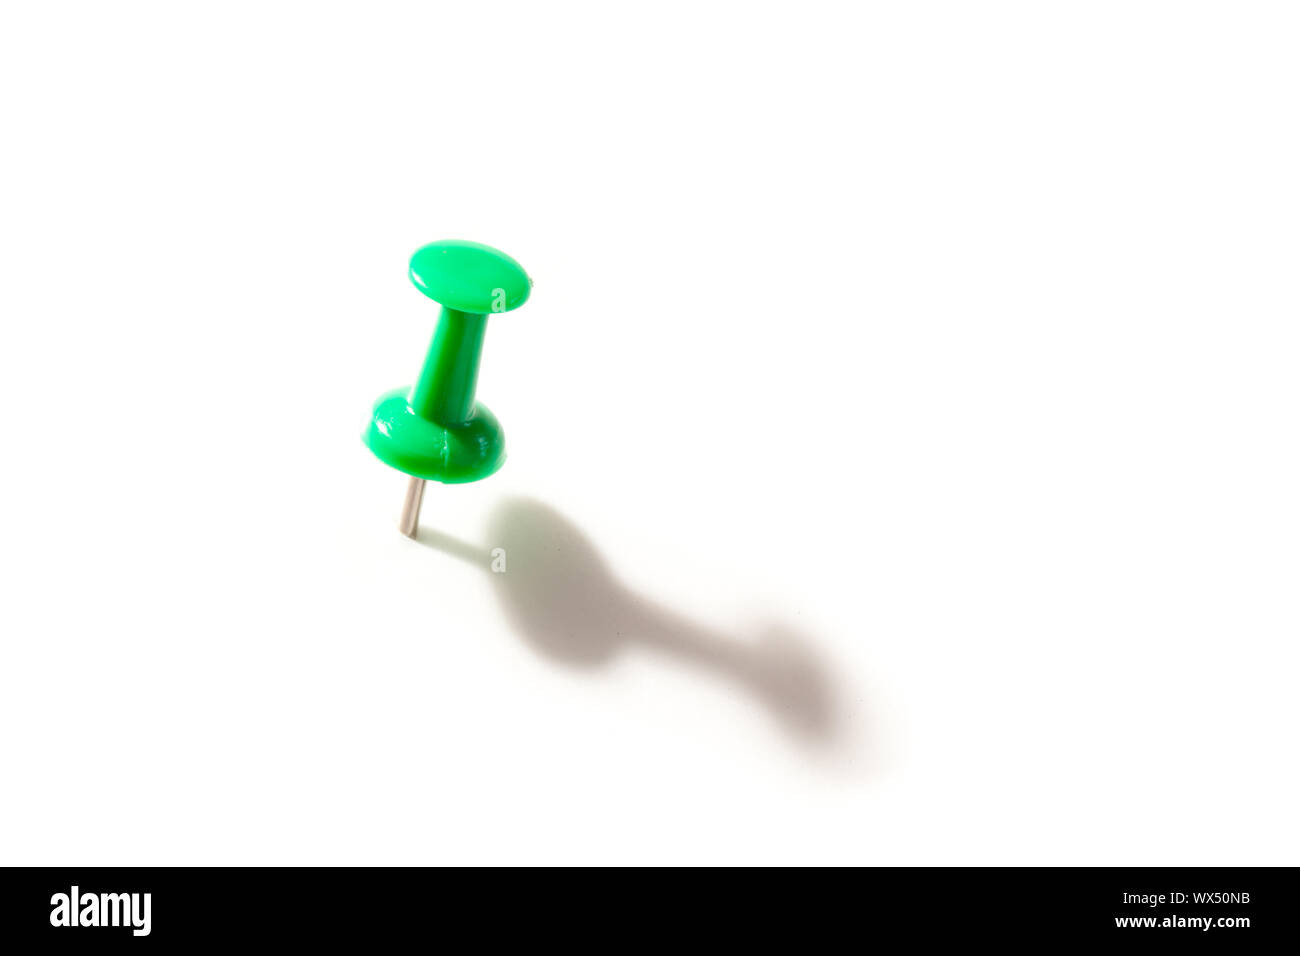 Green pushpin against a white background Stock Photo - Alamy